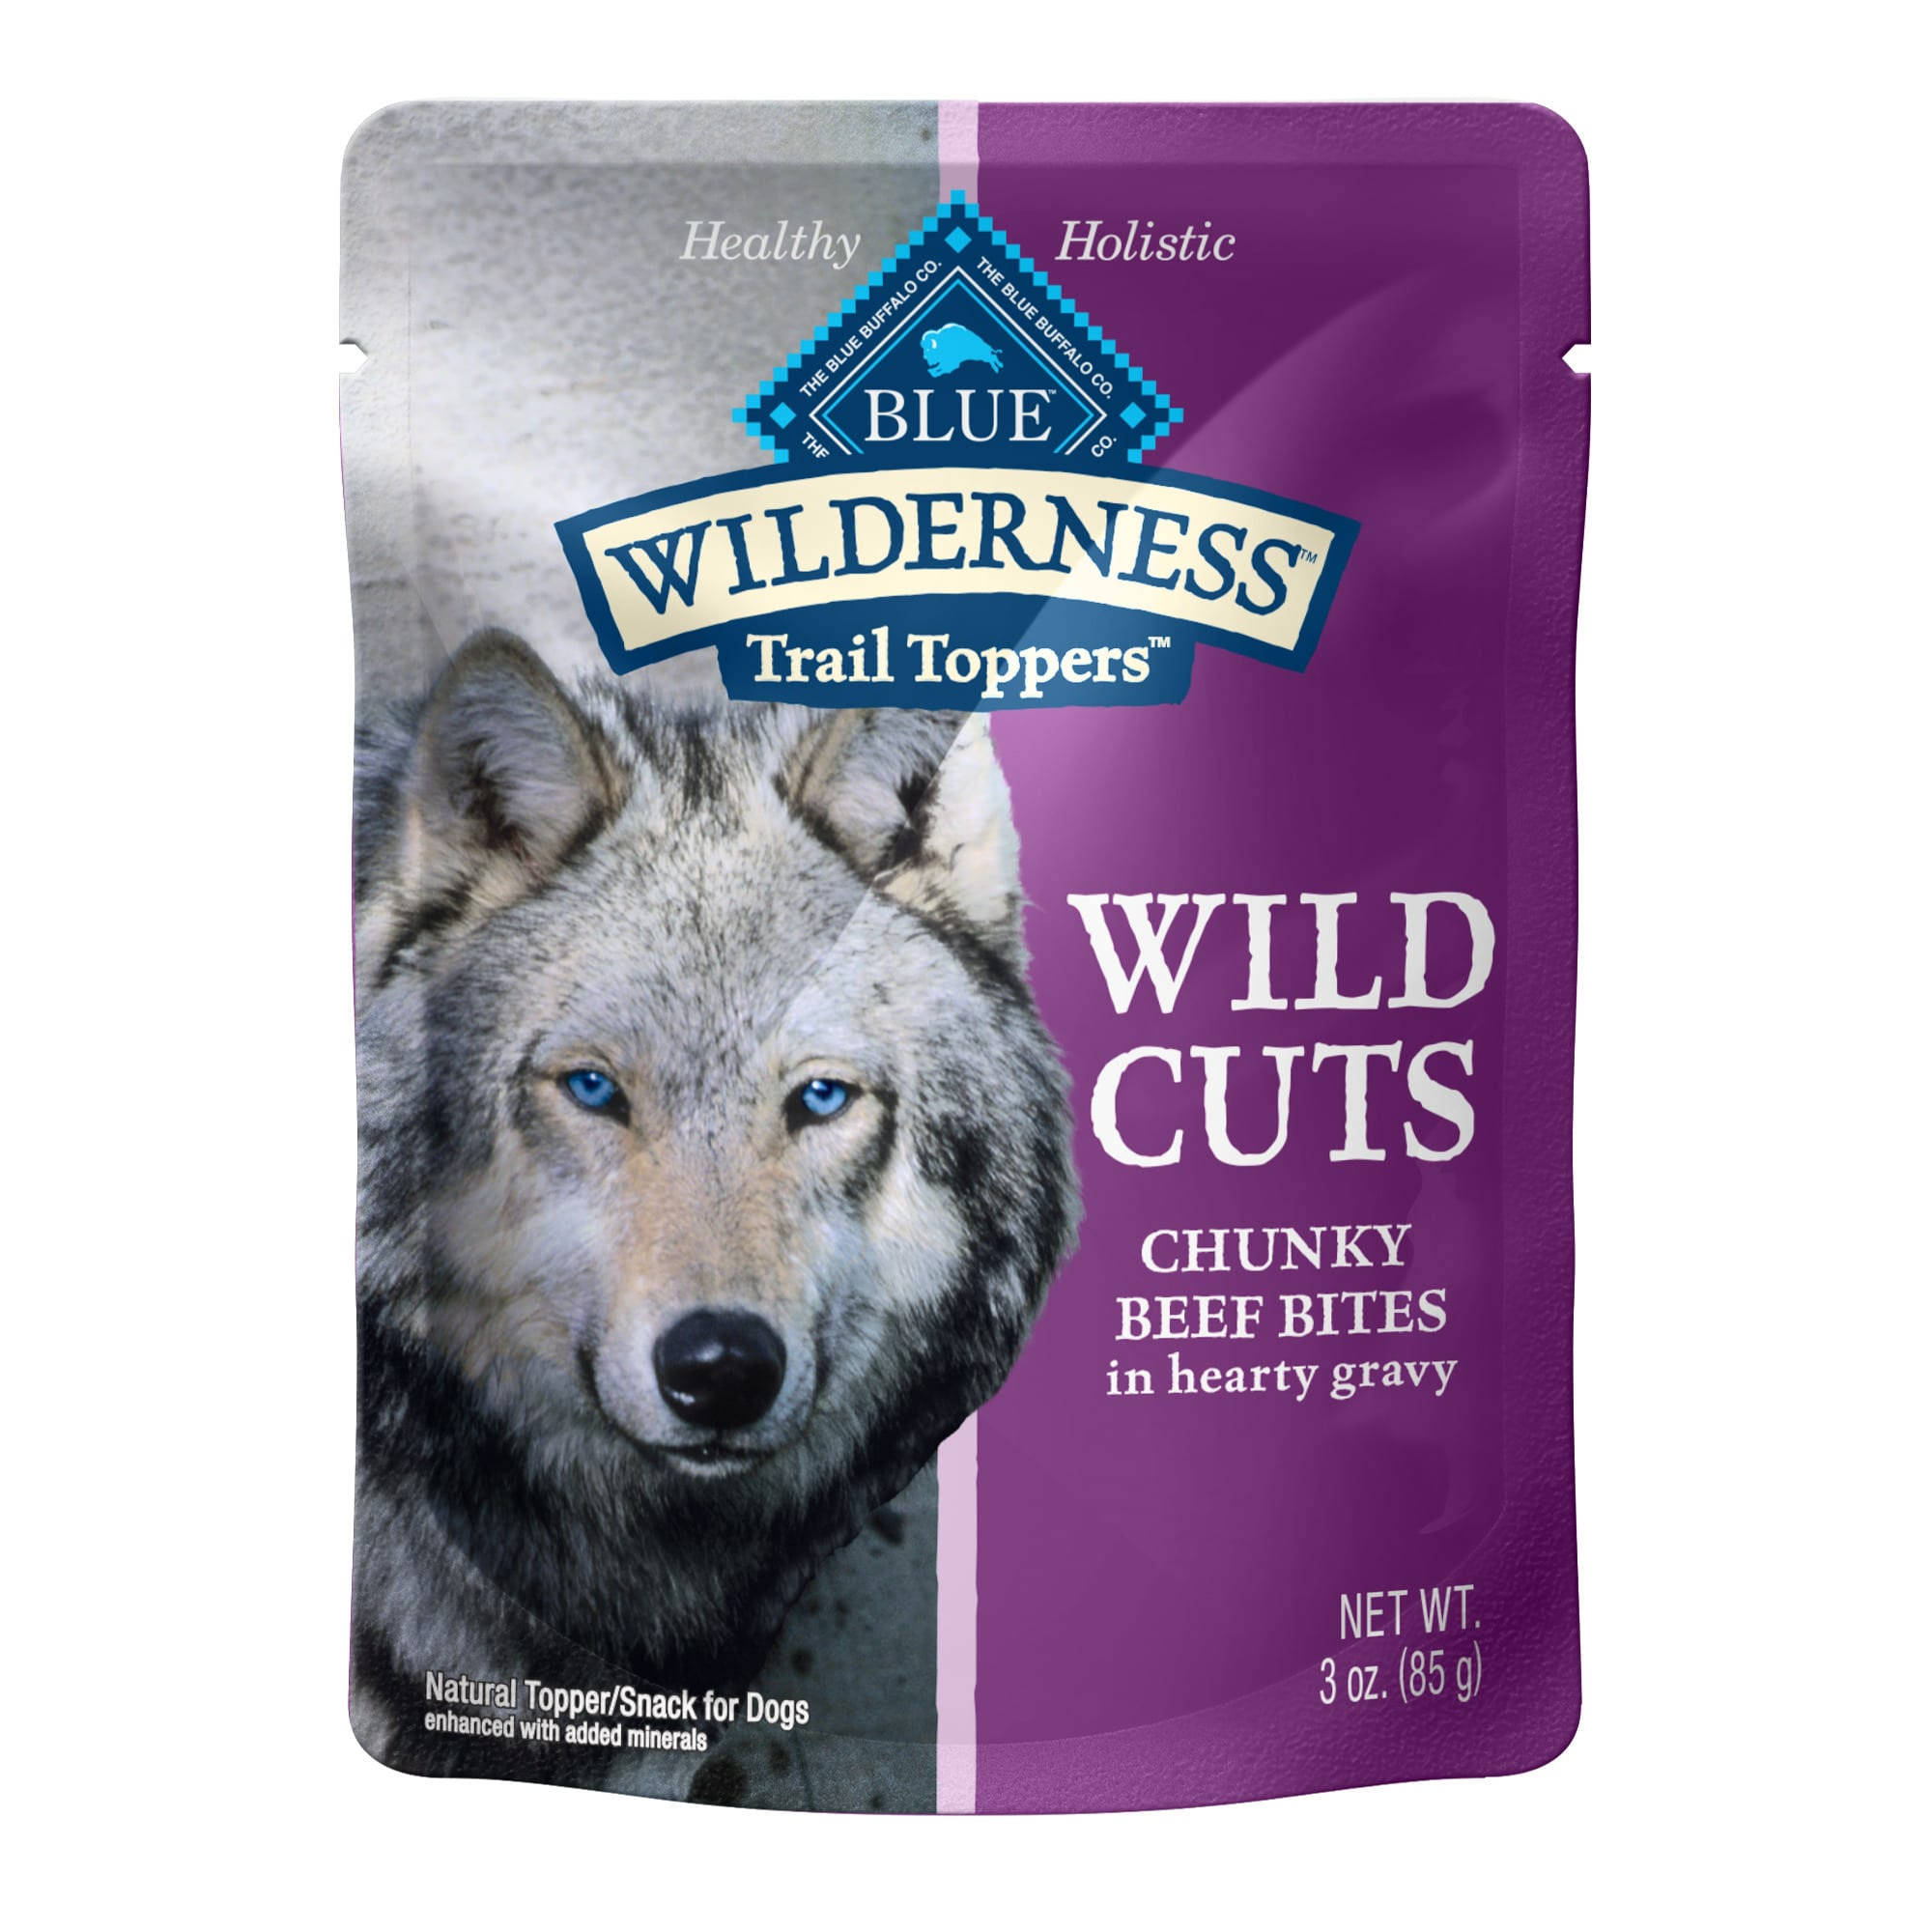 Blue Buffalo Wilderness Trail Toppers Dog Food - Wild Cuts, Beef Bites, 3oz